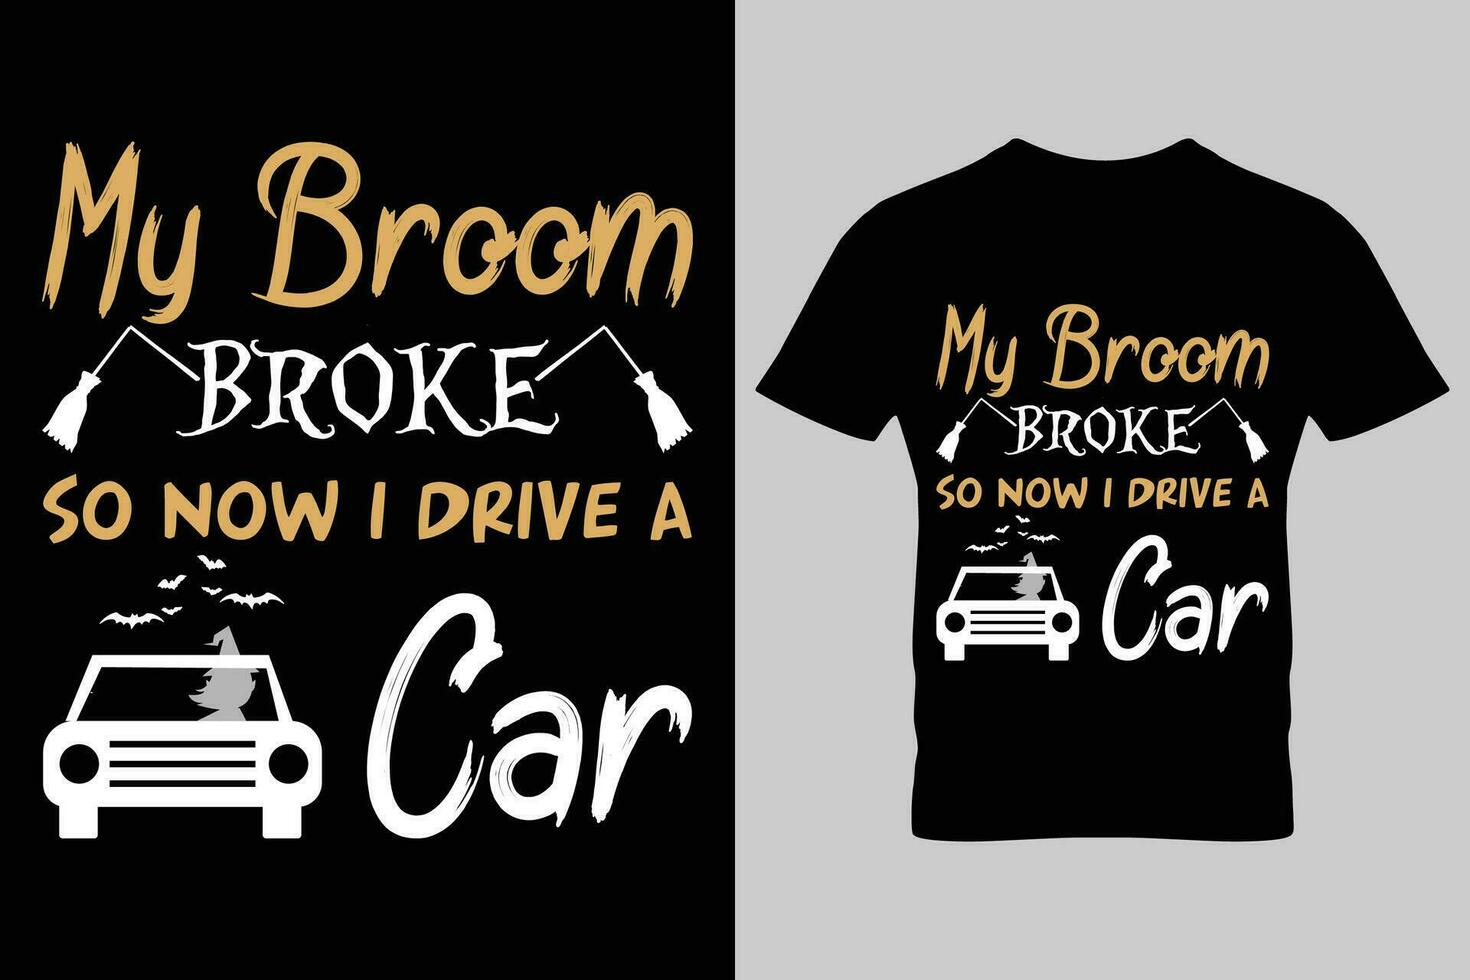 My Broom Broke so now i drive a car. Halloween typography t-shirt design template. vector